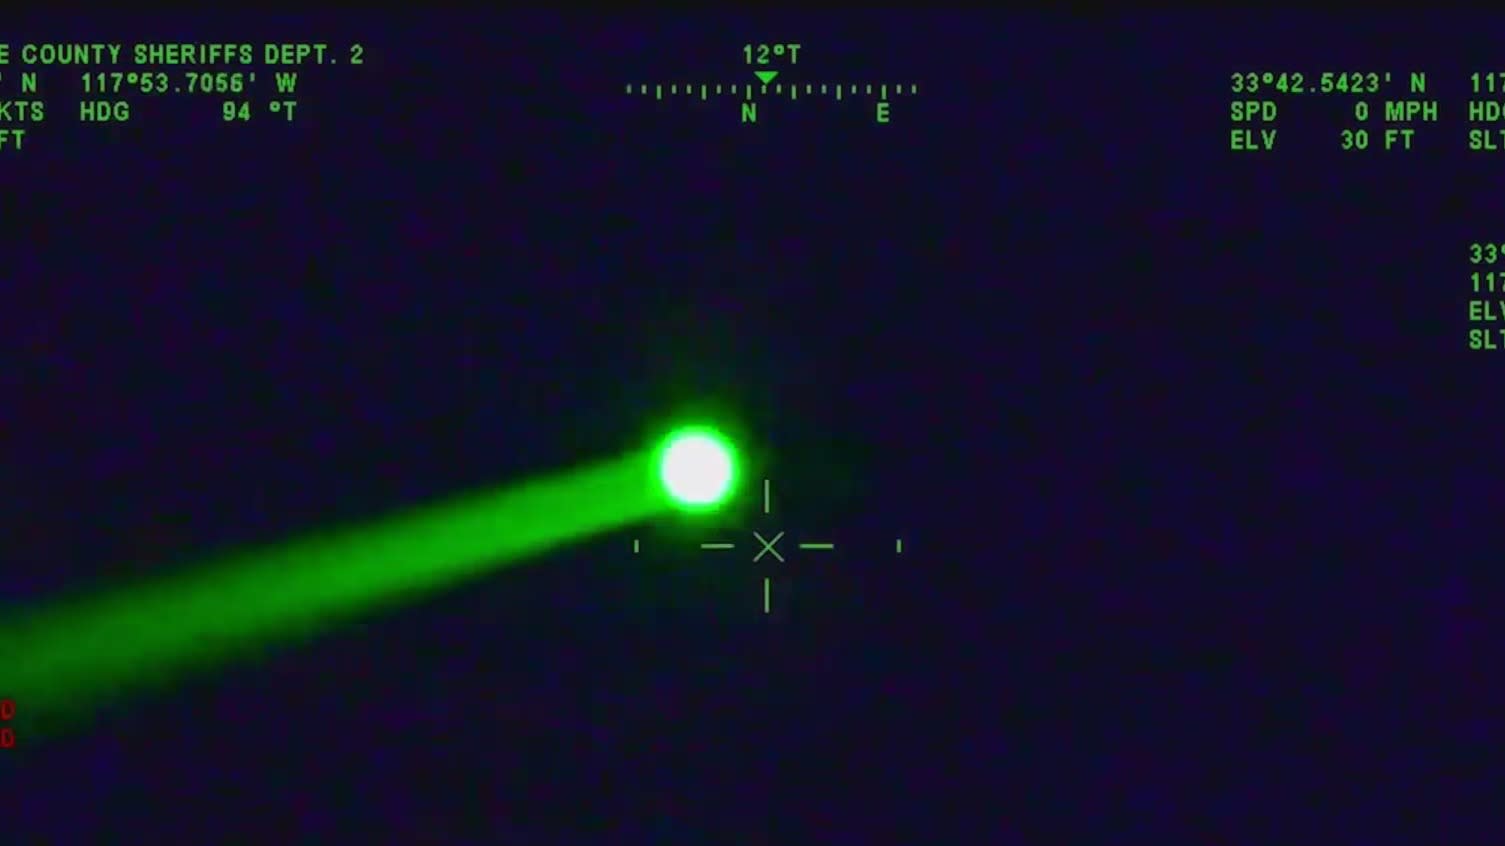 Government considers laser pointer licences in crackdown after